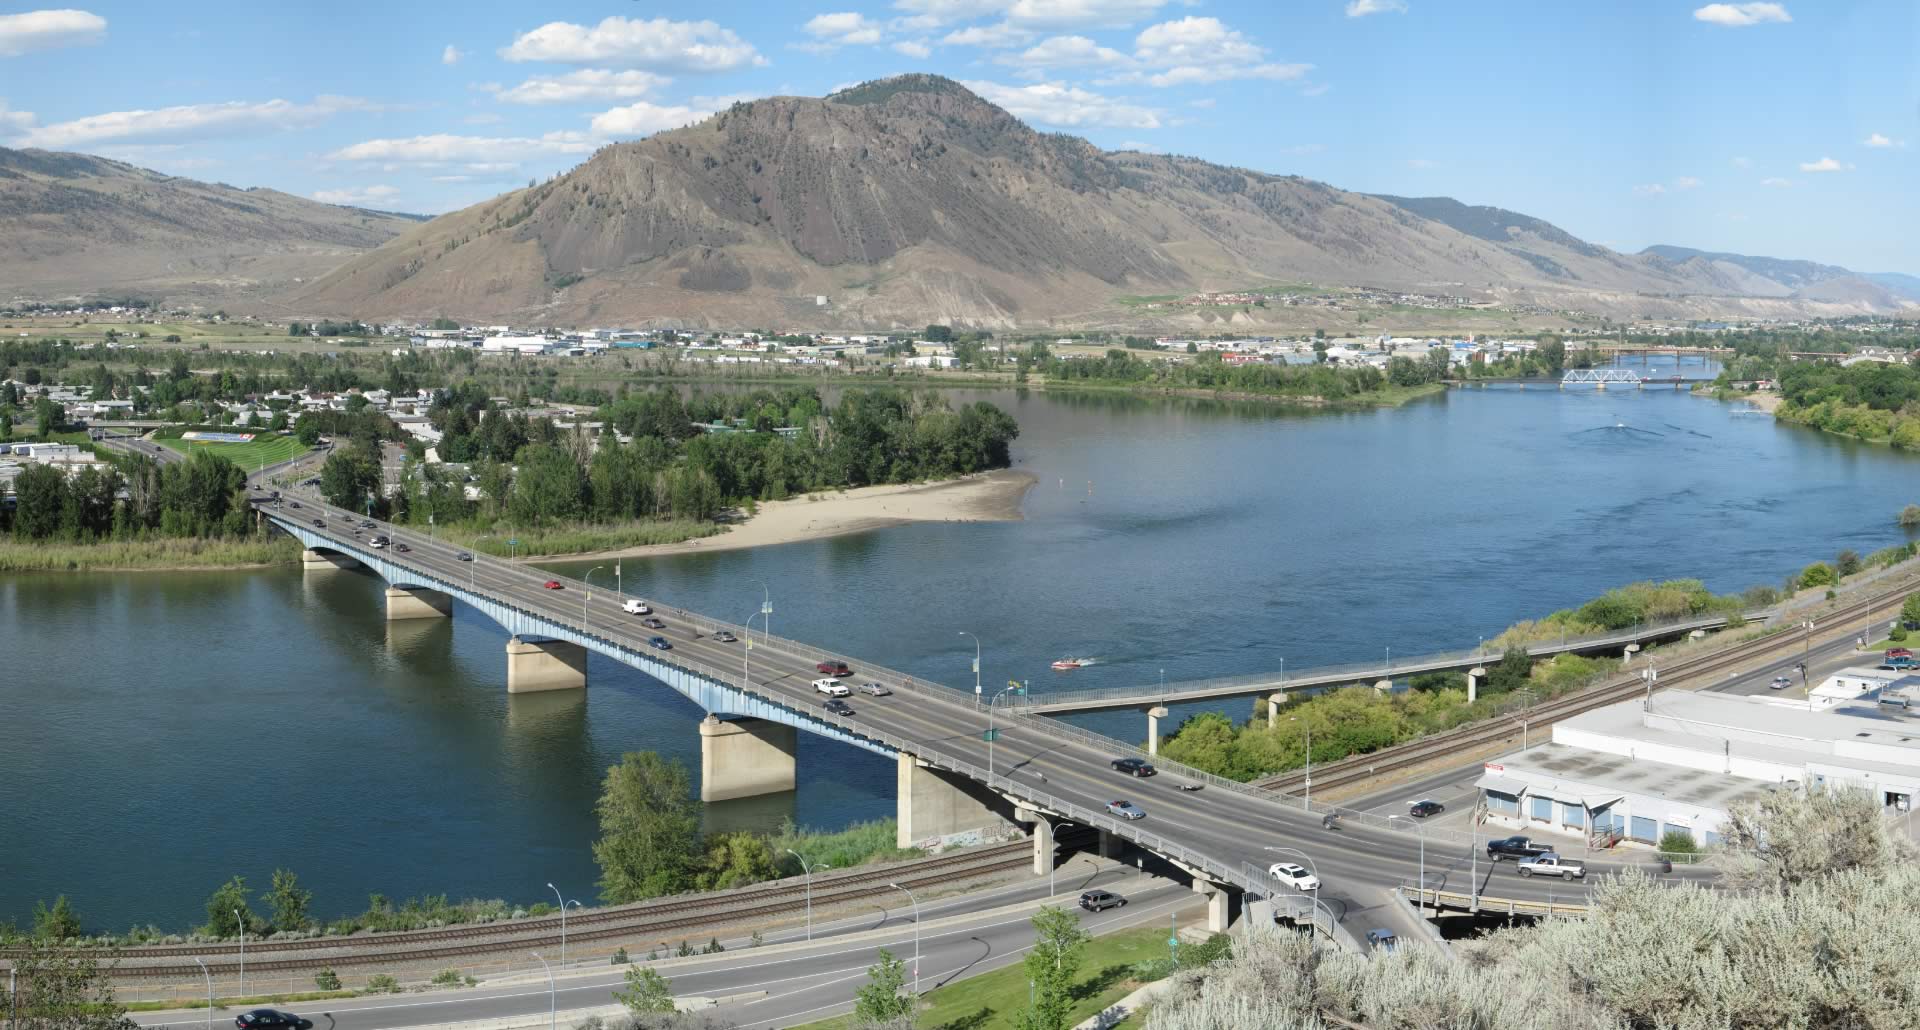 Some reflections on our amazing Kamloops business community, Covid 19, and how citizens can help businesses through the pandemic